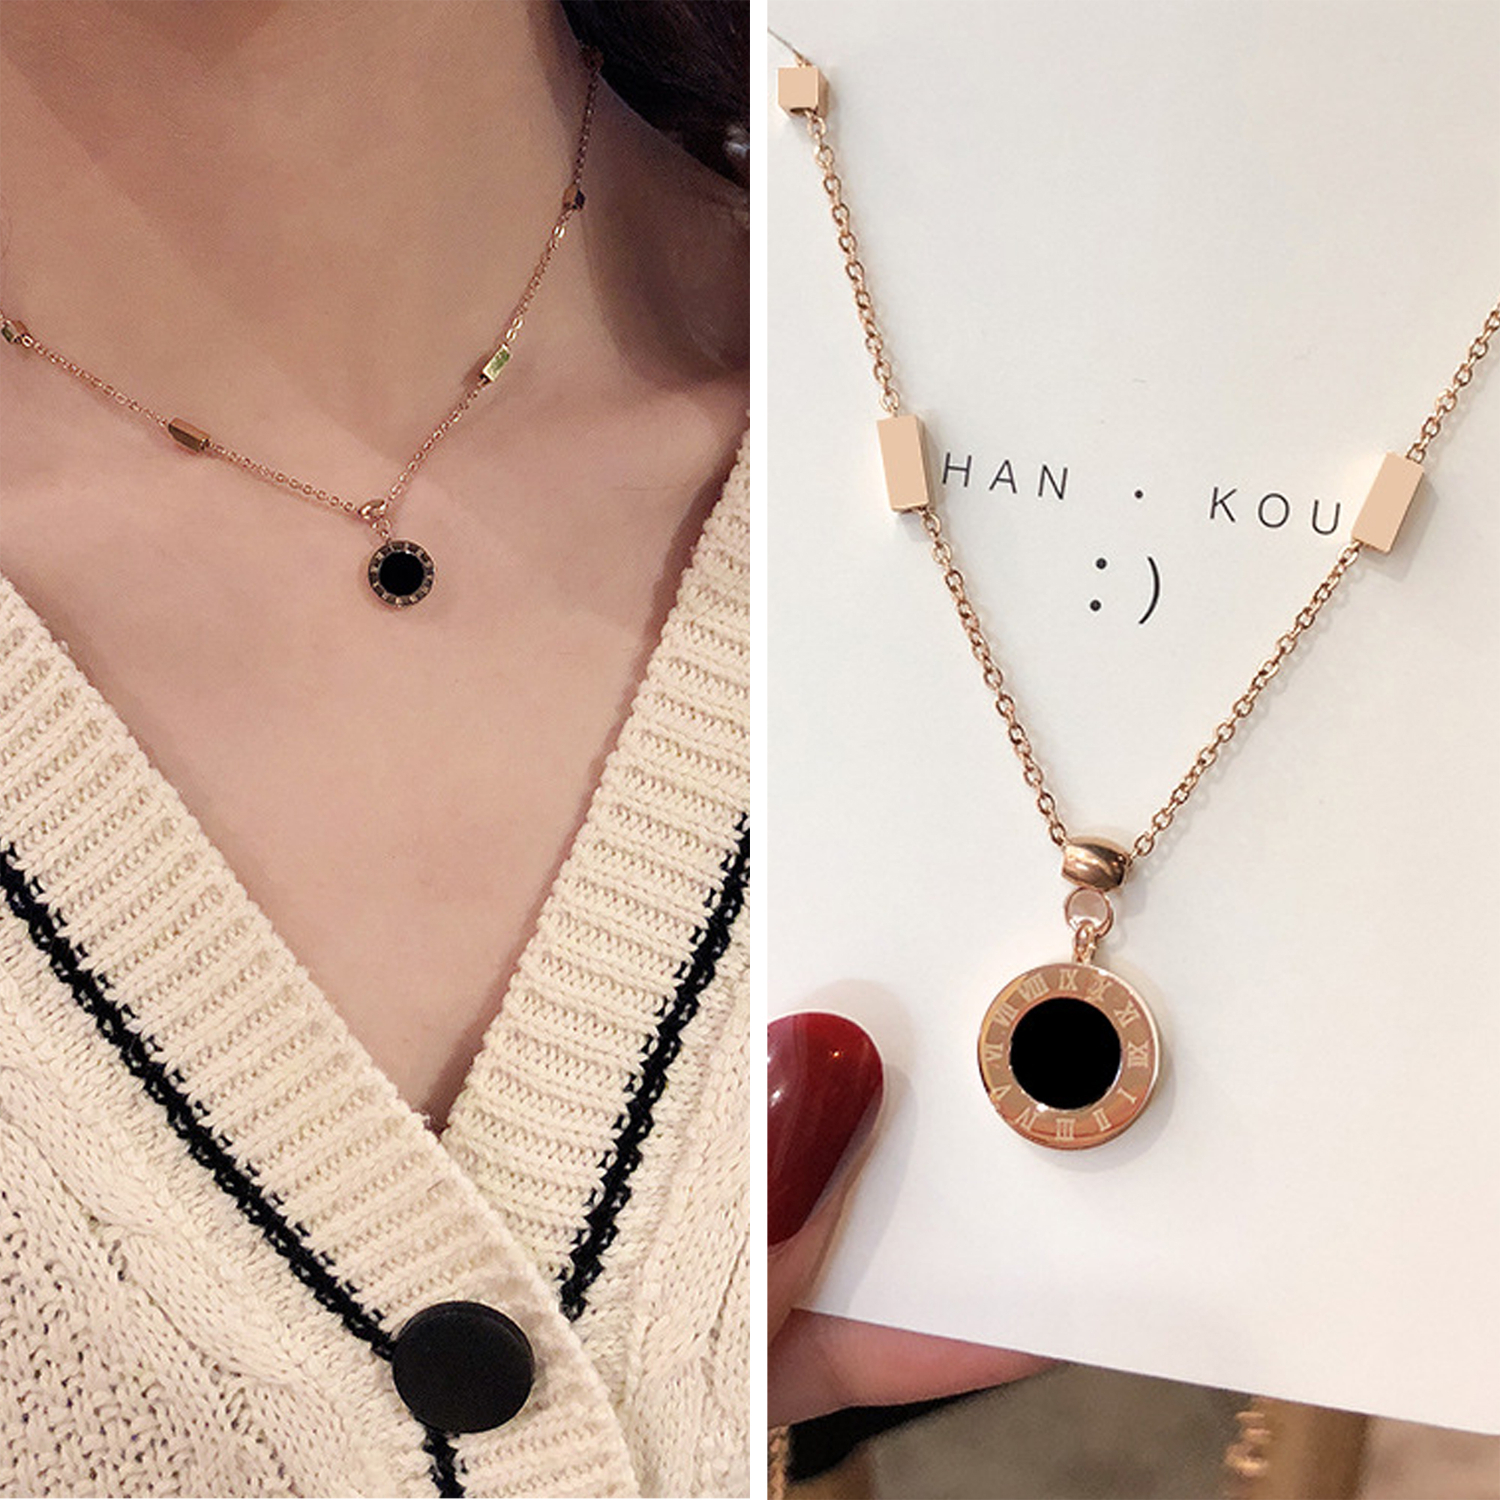 Black round simple necklace clavicle chain jewelry fashion accessories